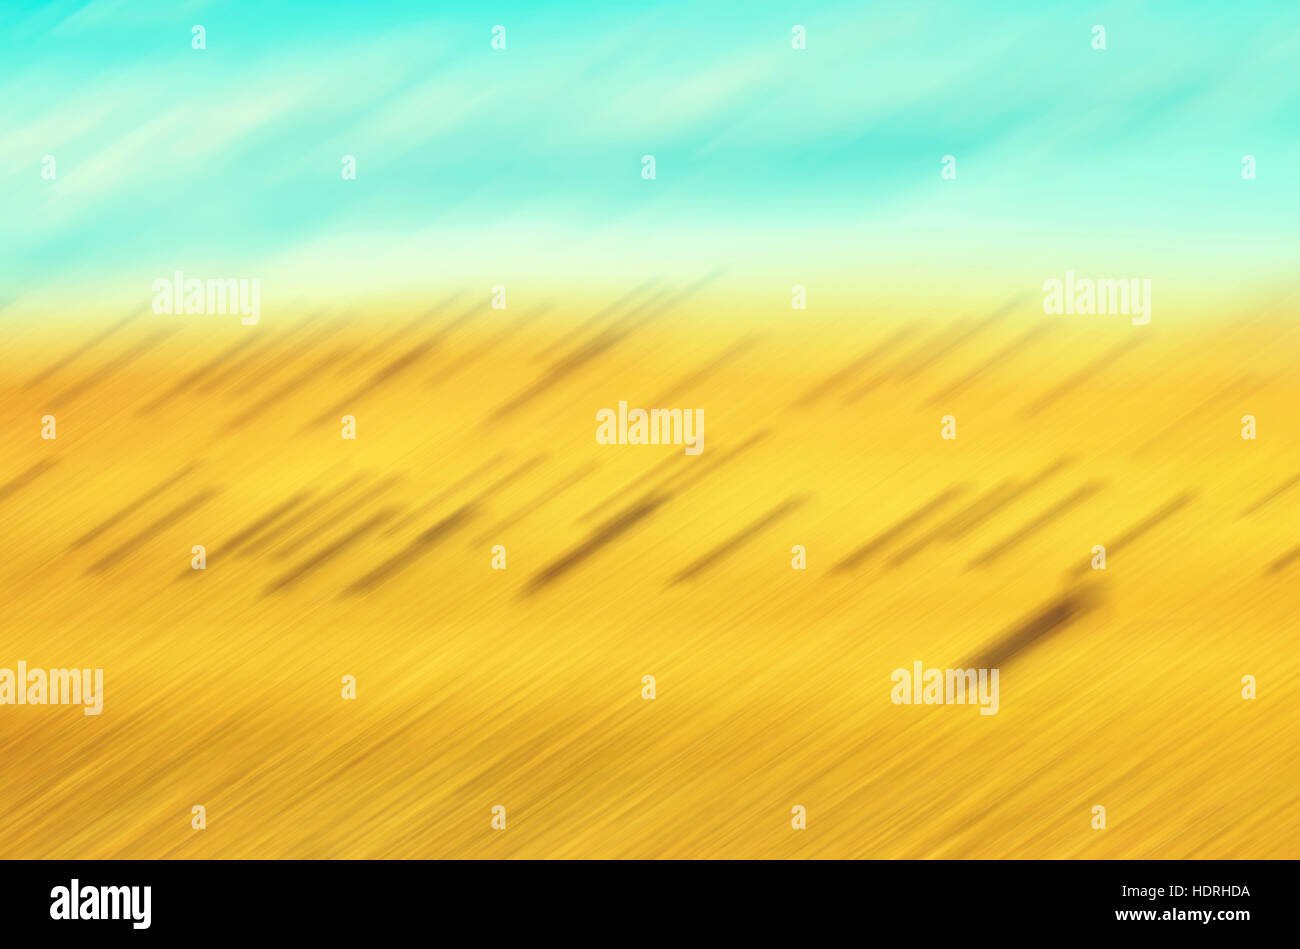 Motion blurred meadow, abstract nature background or wallpaper. Stock Photo